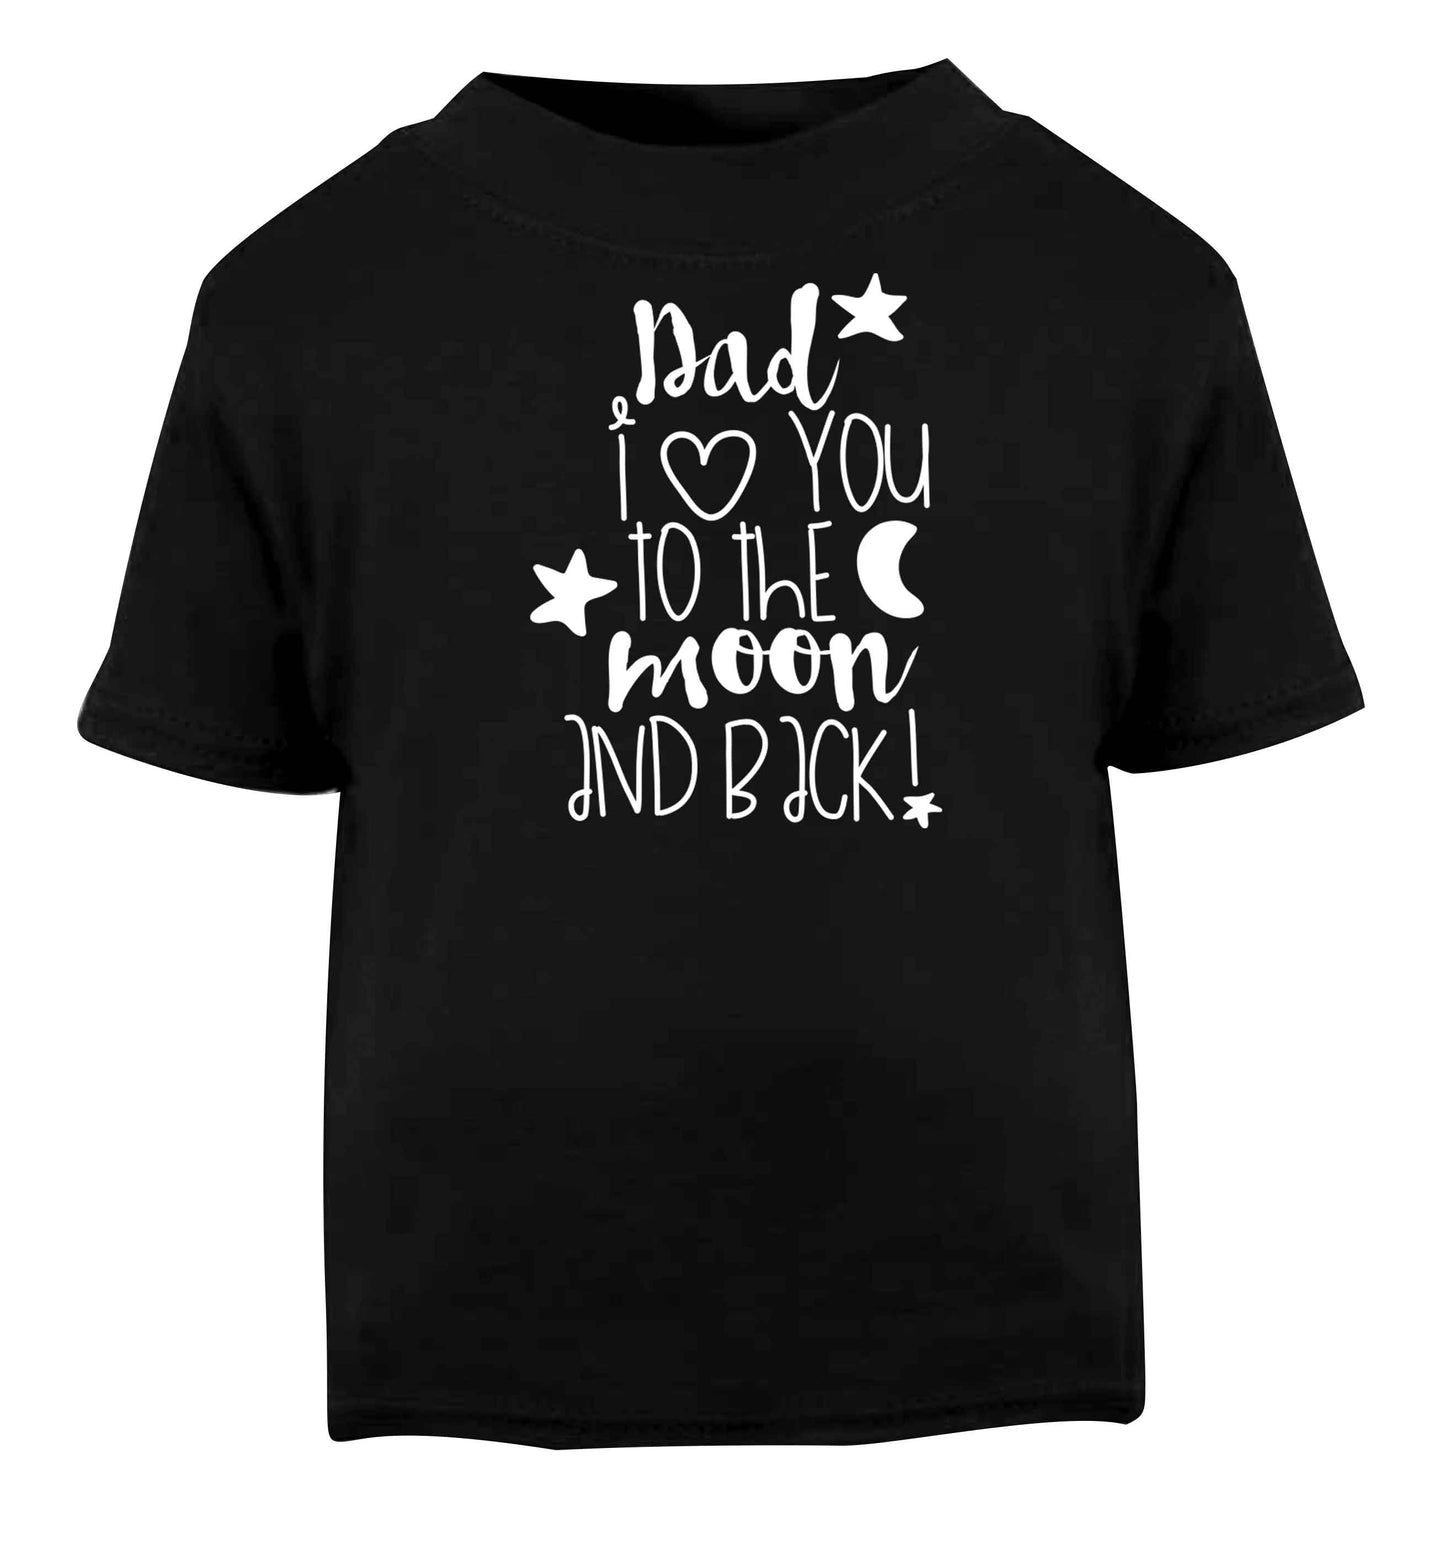 Dad I love you to the moon and back Black baby toddler Tshirt 2 years